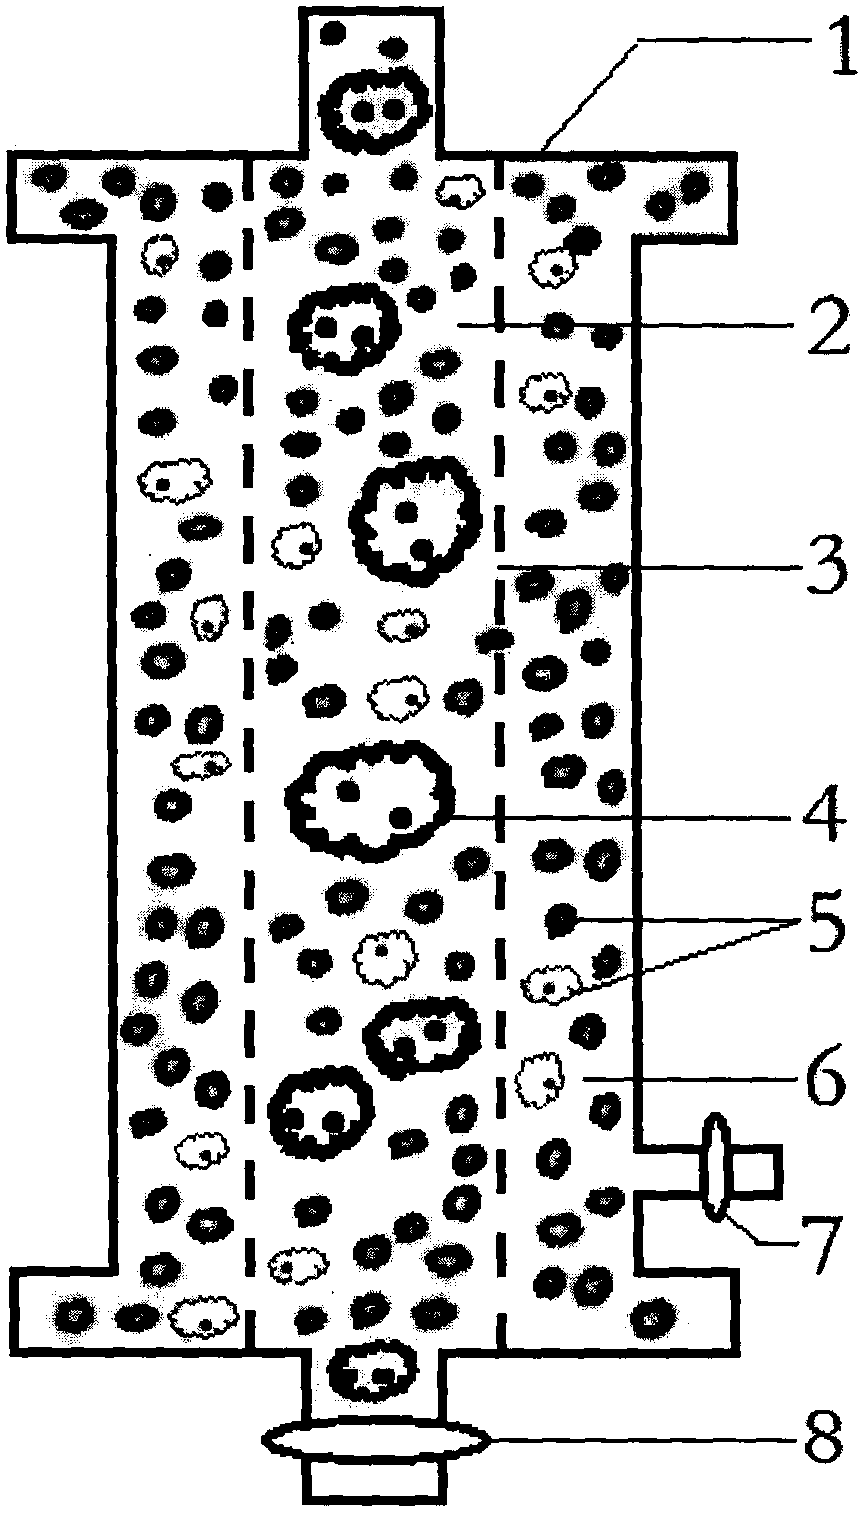 A maternal and fetal blood group incompatibility immunosorbent therapeutic apparatus